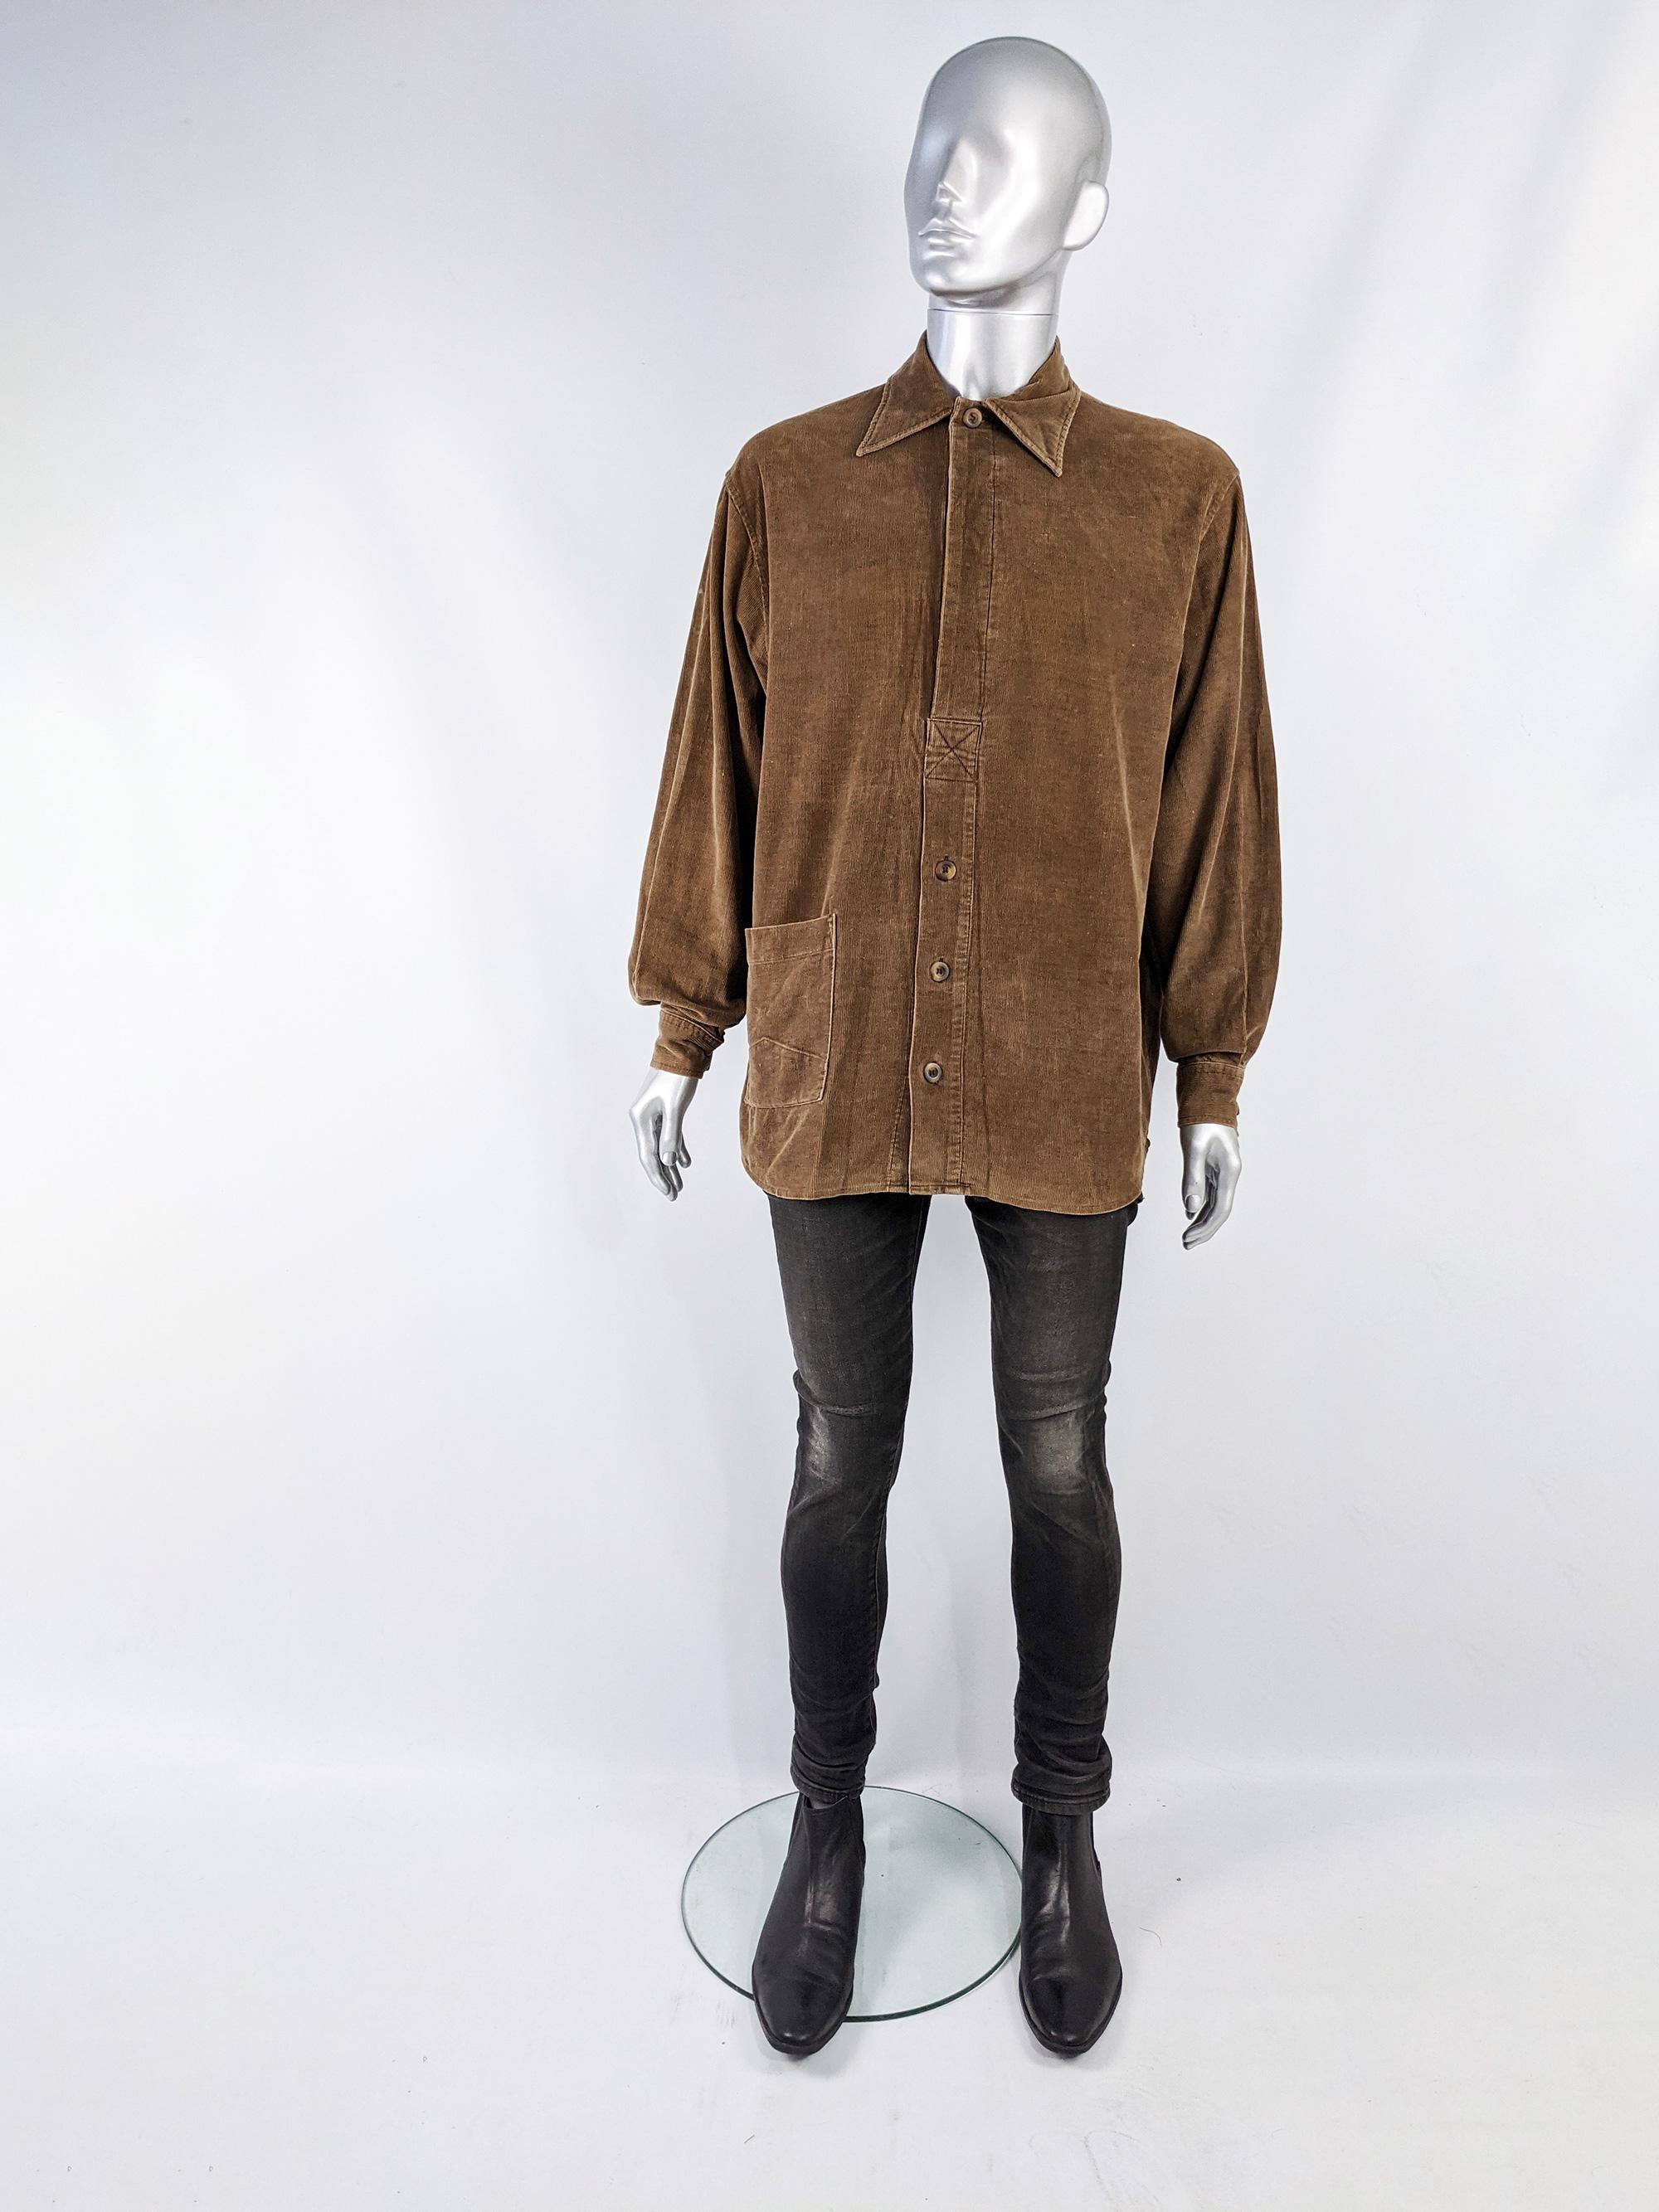 An amazing and rare vintage mens shirt by pioneering black British fashion designer, Joe Casely-Hayford for his Hayford line (founded in 1992). In a brown corduroy fabric with an artist smock / workwear inspired cut, it has button fly front